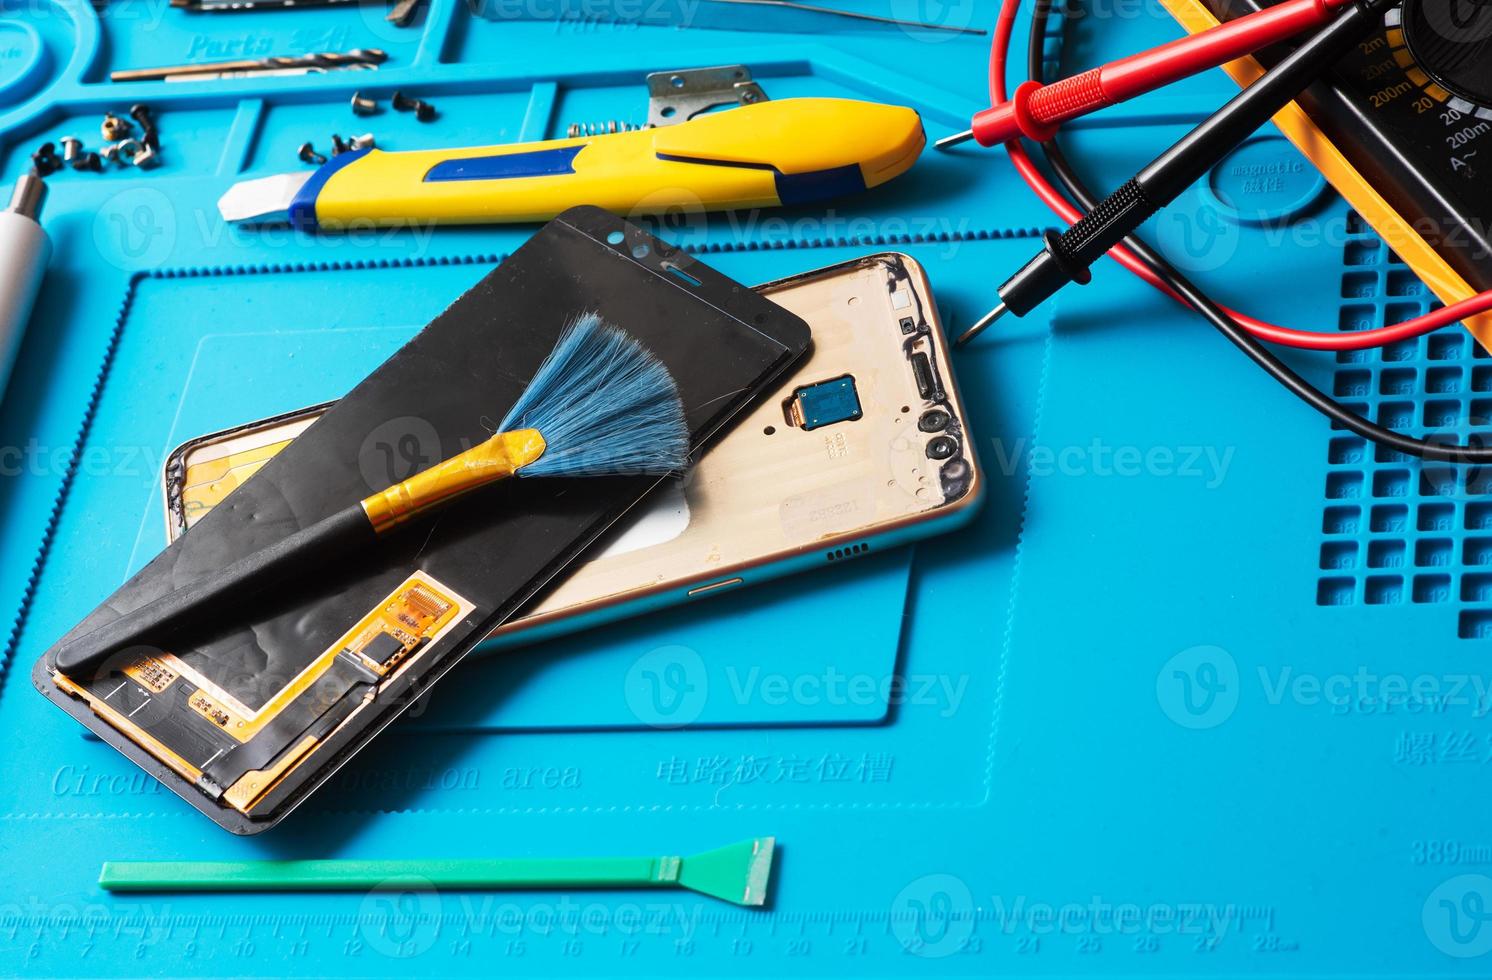 Flat lay image of dismantling the broken smart phone for preparing to repair or replace some components, Top view photo